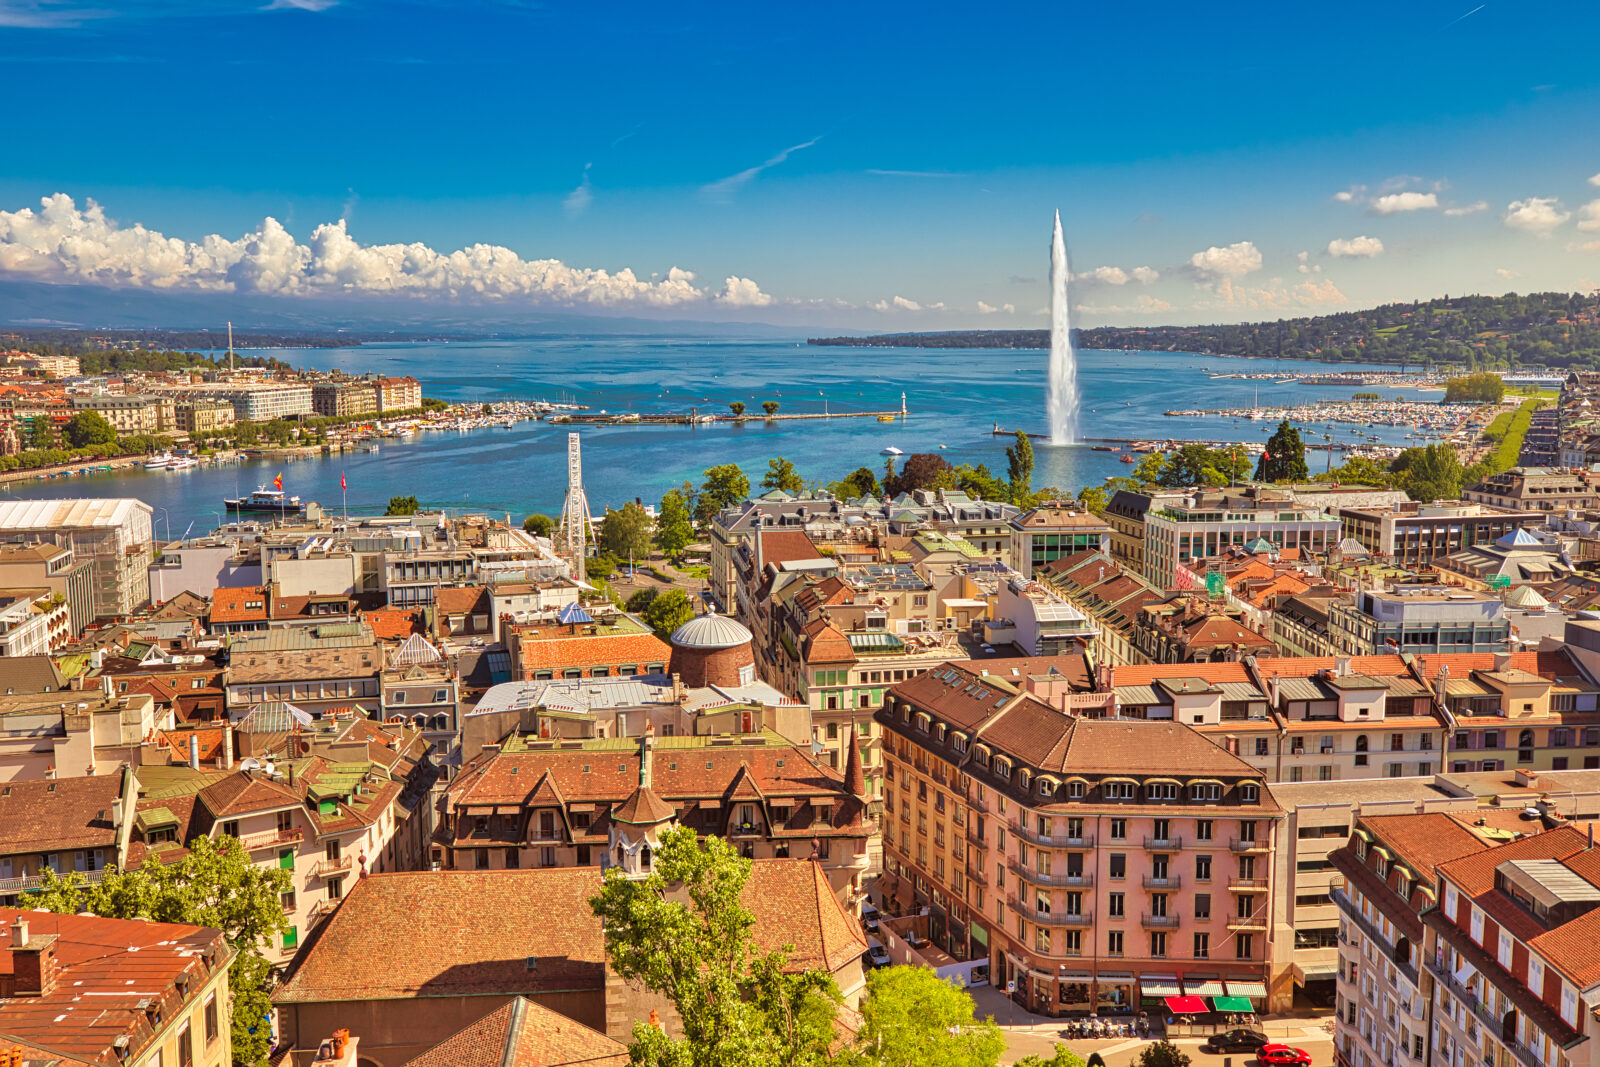 An aerial view of Geneva, Switzerland with Jet d'eau fountain and lake geneva in the foreground